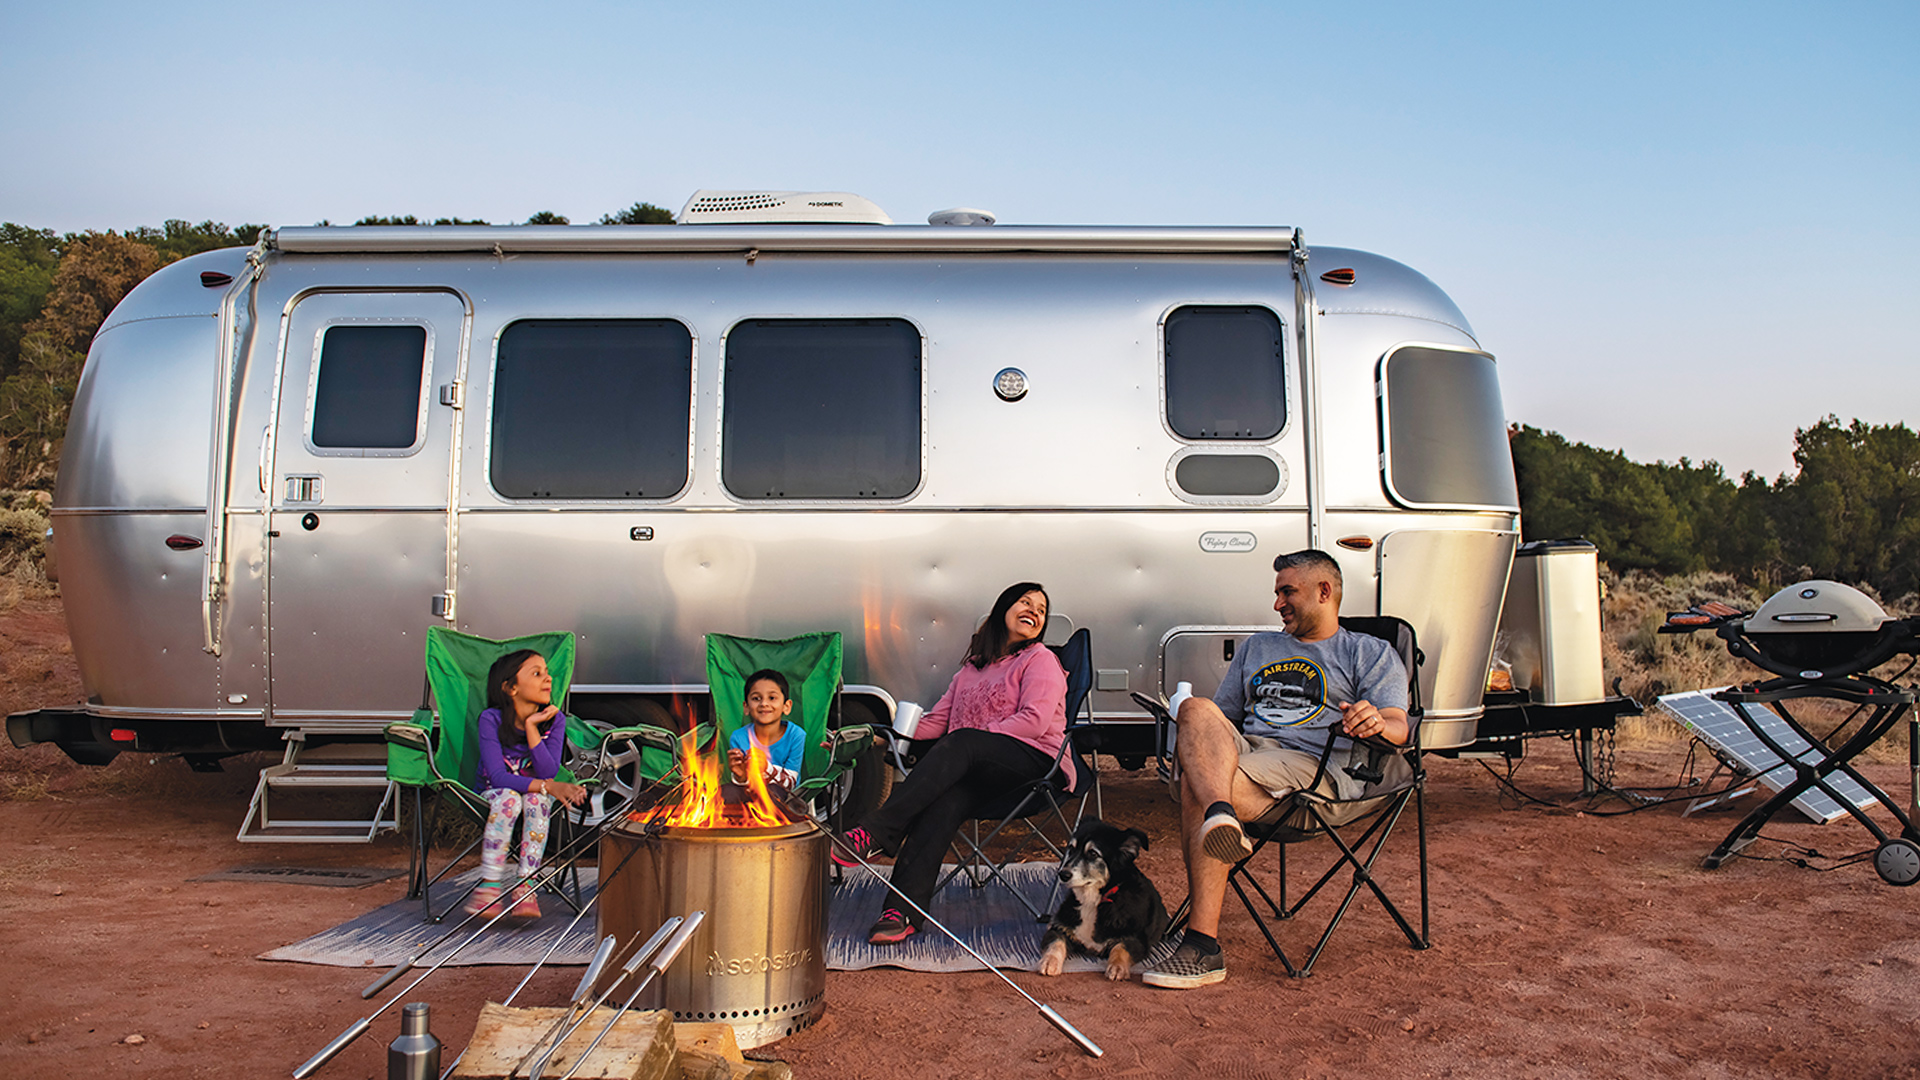 airstream flying cloud travel trailer with family sitting by the campfire in the desert